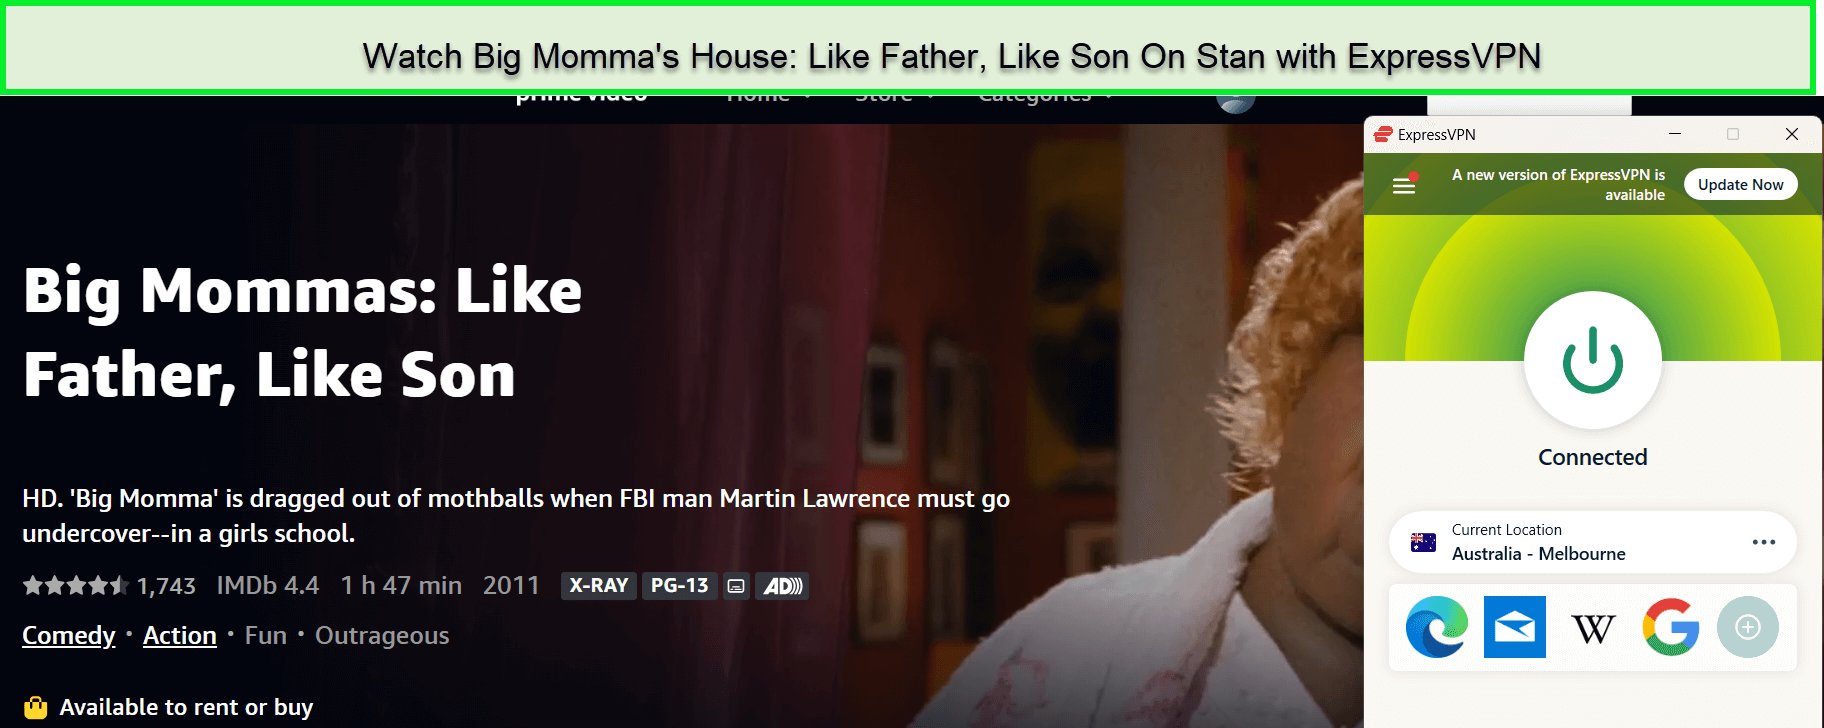 Watch Big Momma's House: Like Father, Like Son in-New Zealand On Stan